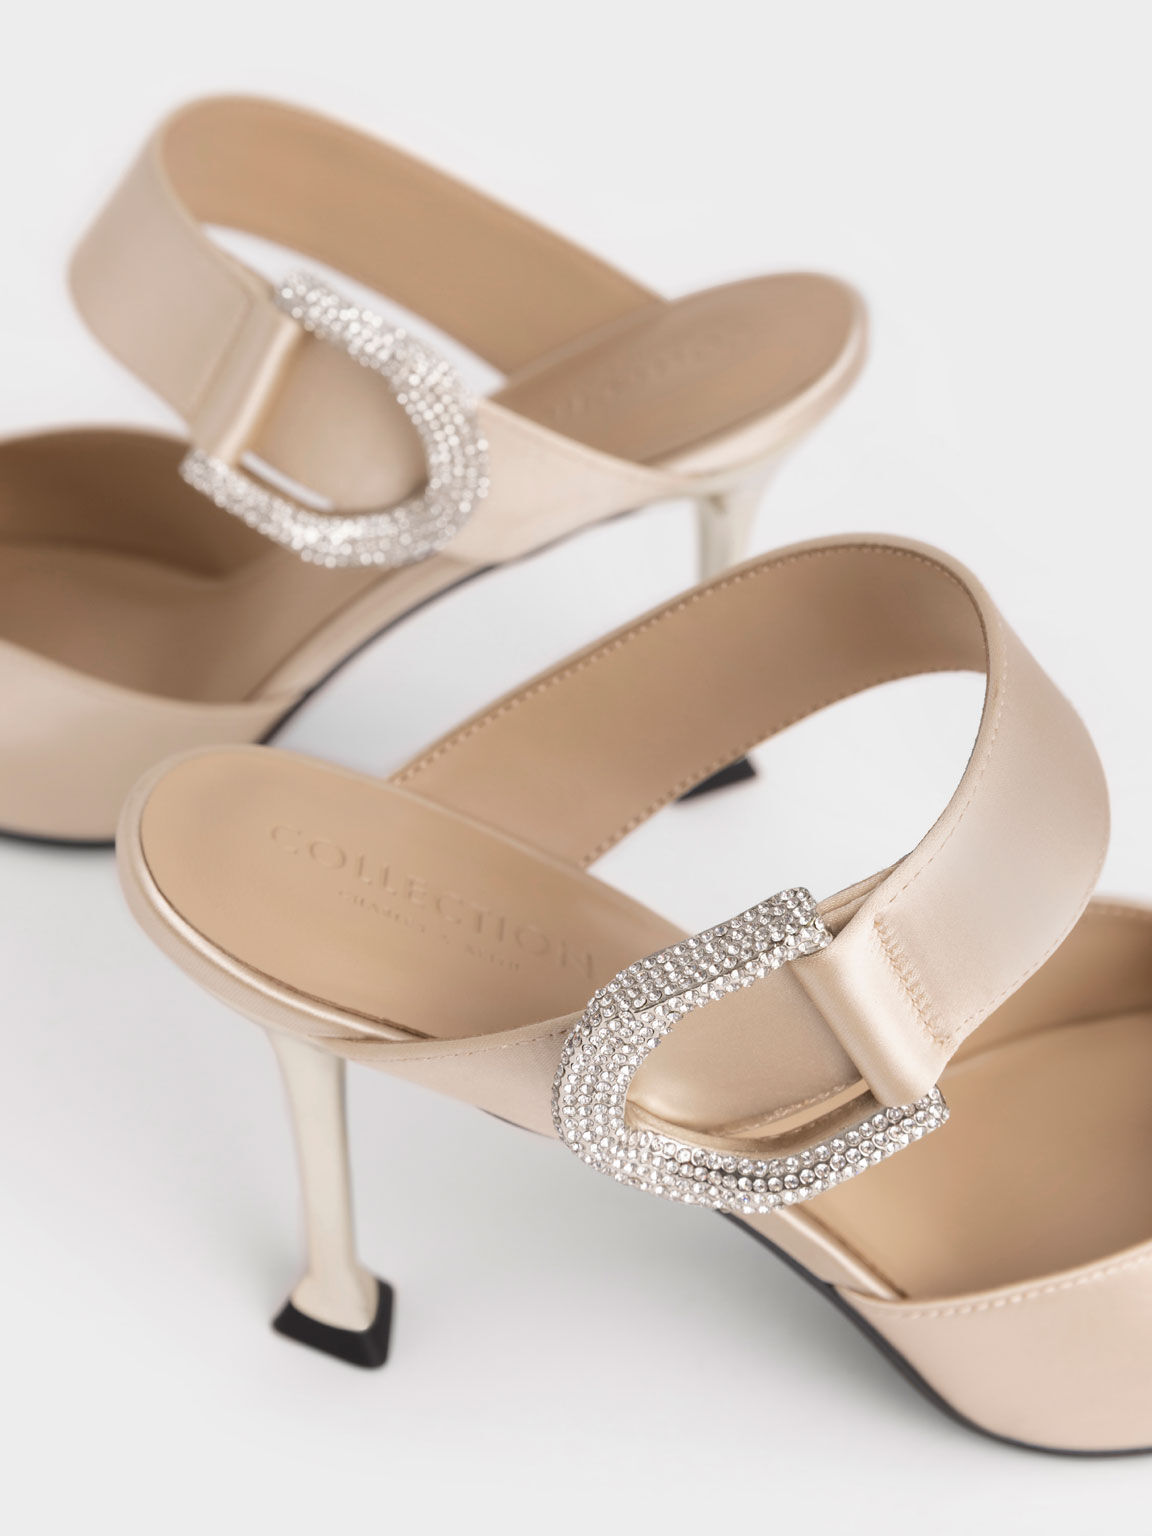 Gabine Recycled Polyester Mules, Champagne, hi-res